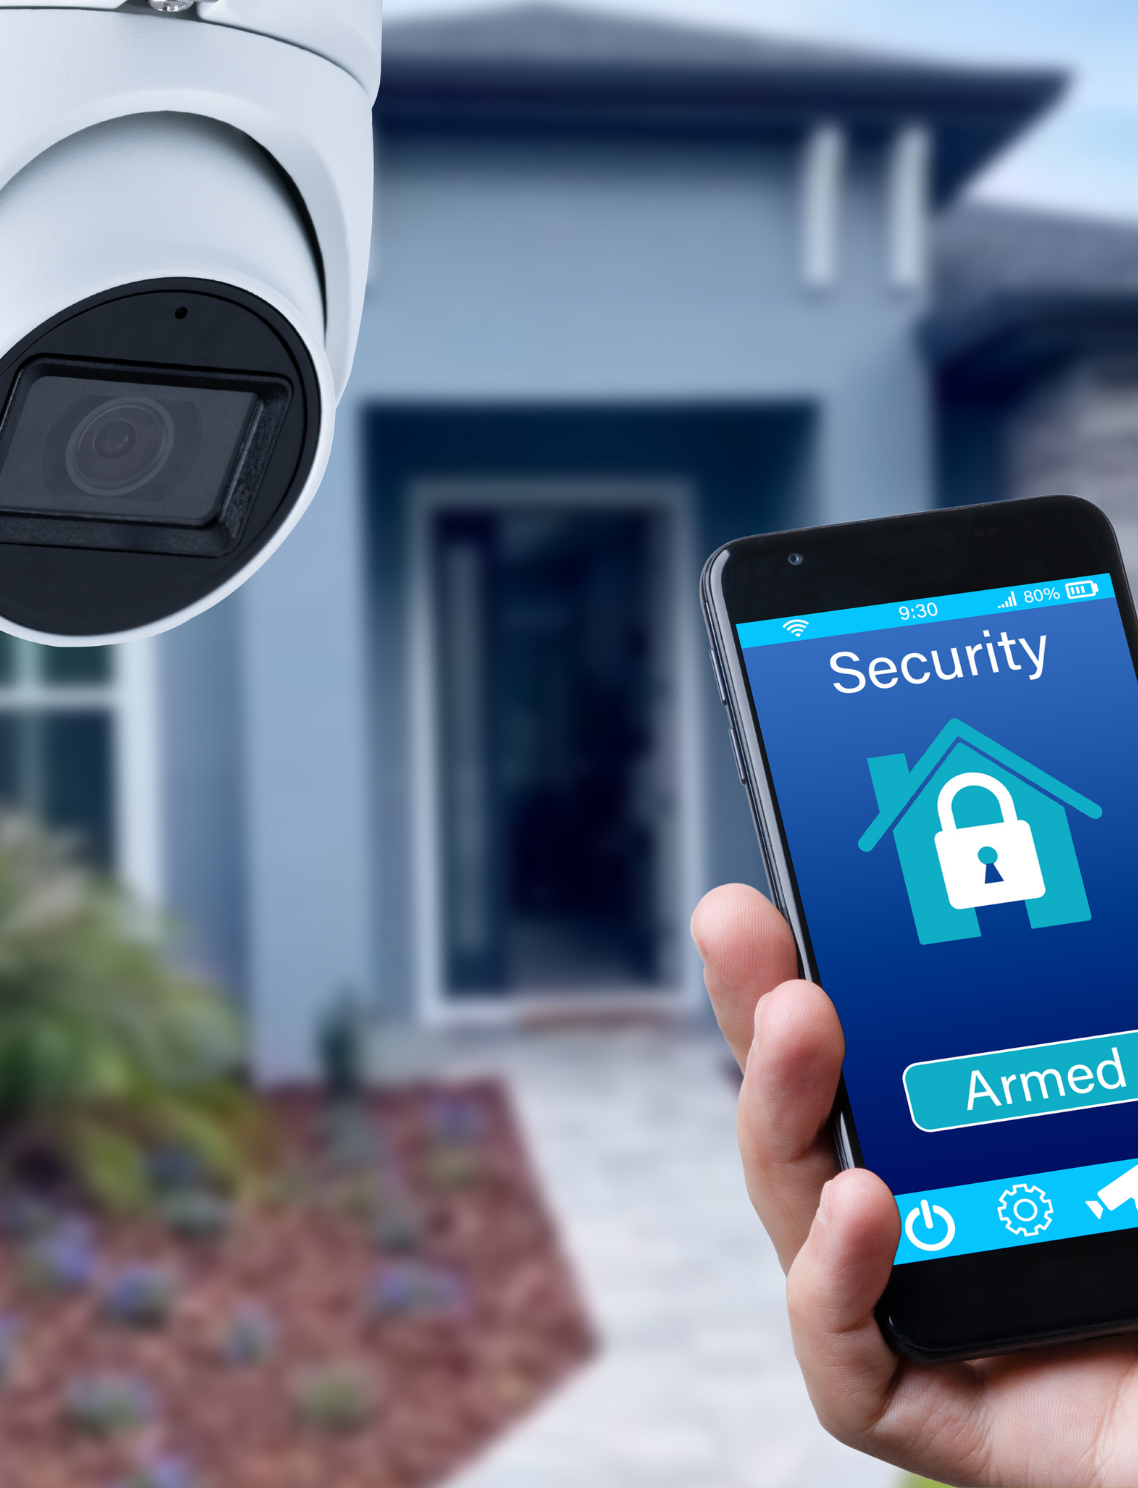 Professional Security System Installation In London​